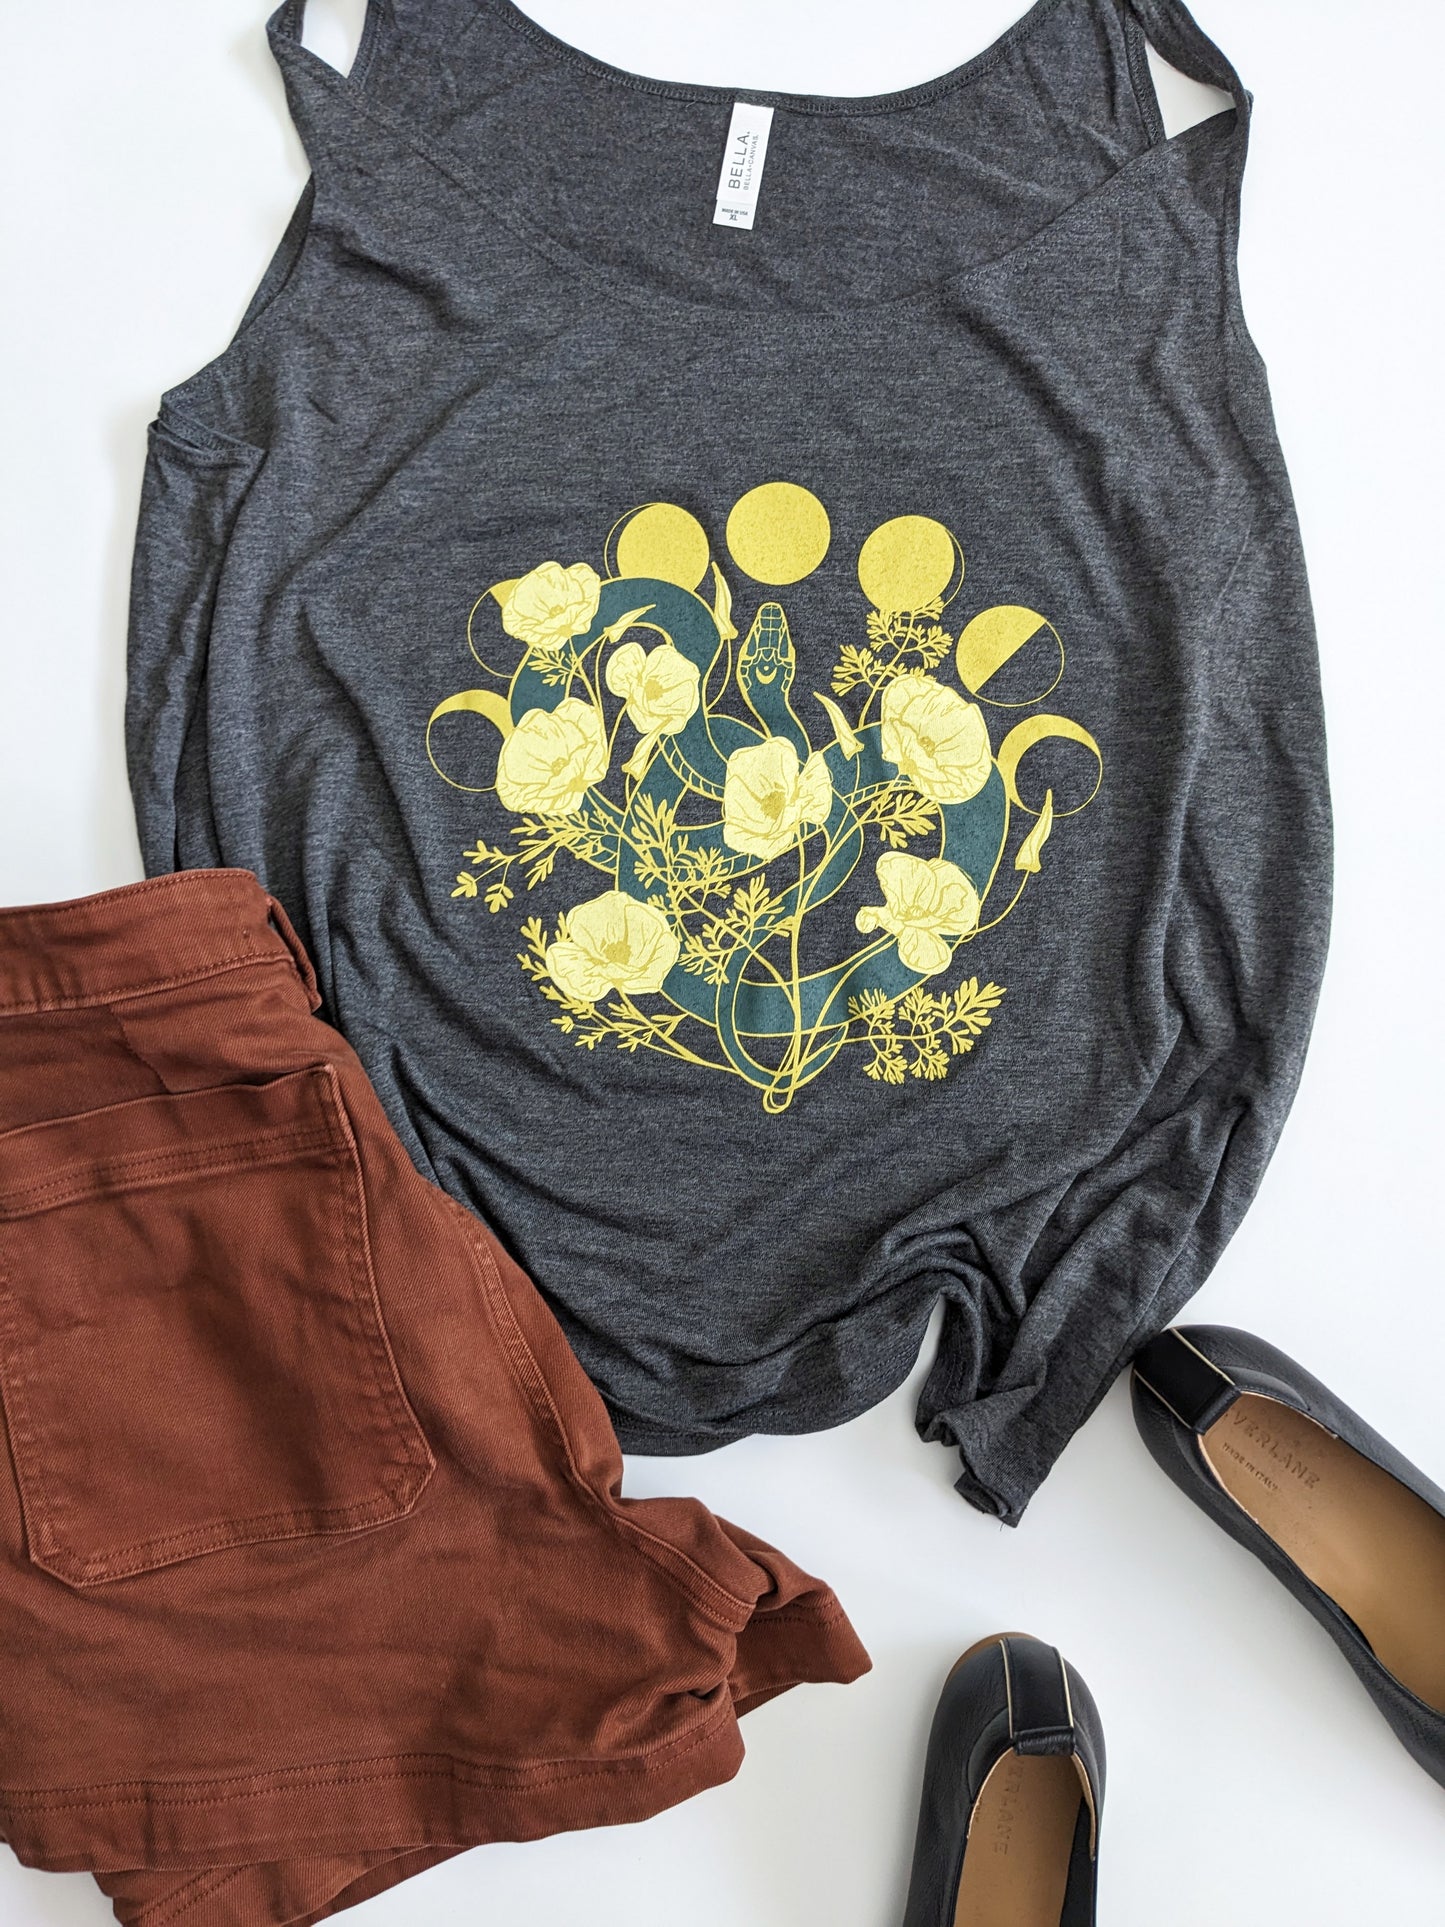 This super soft tank top features a snake among poppy flowers and the phases of the moon.